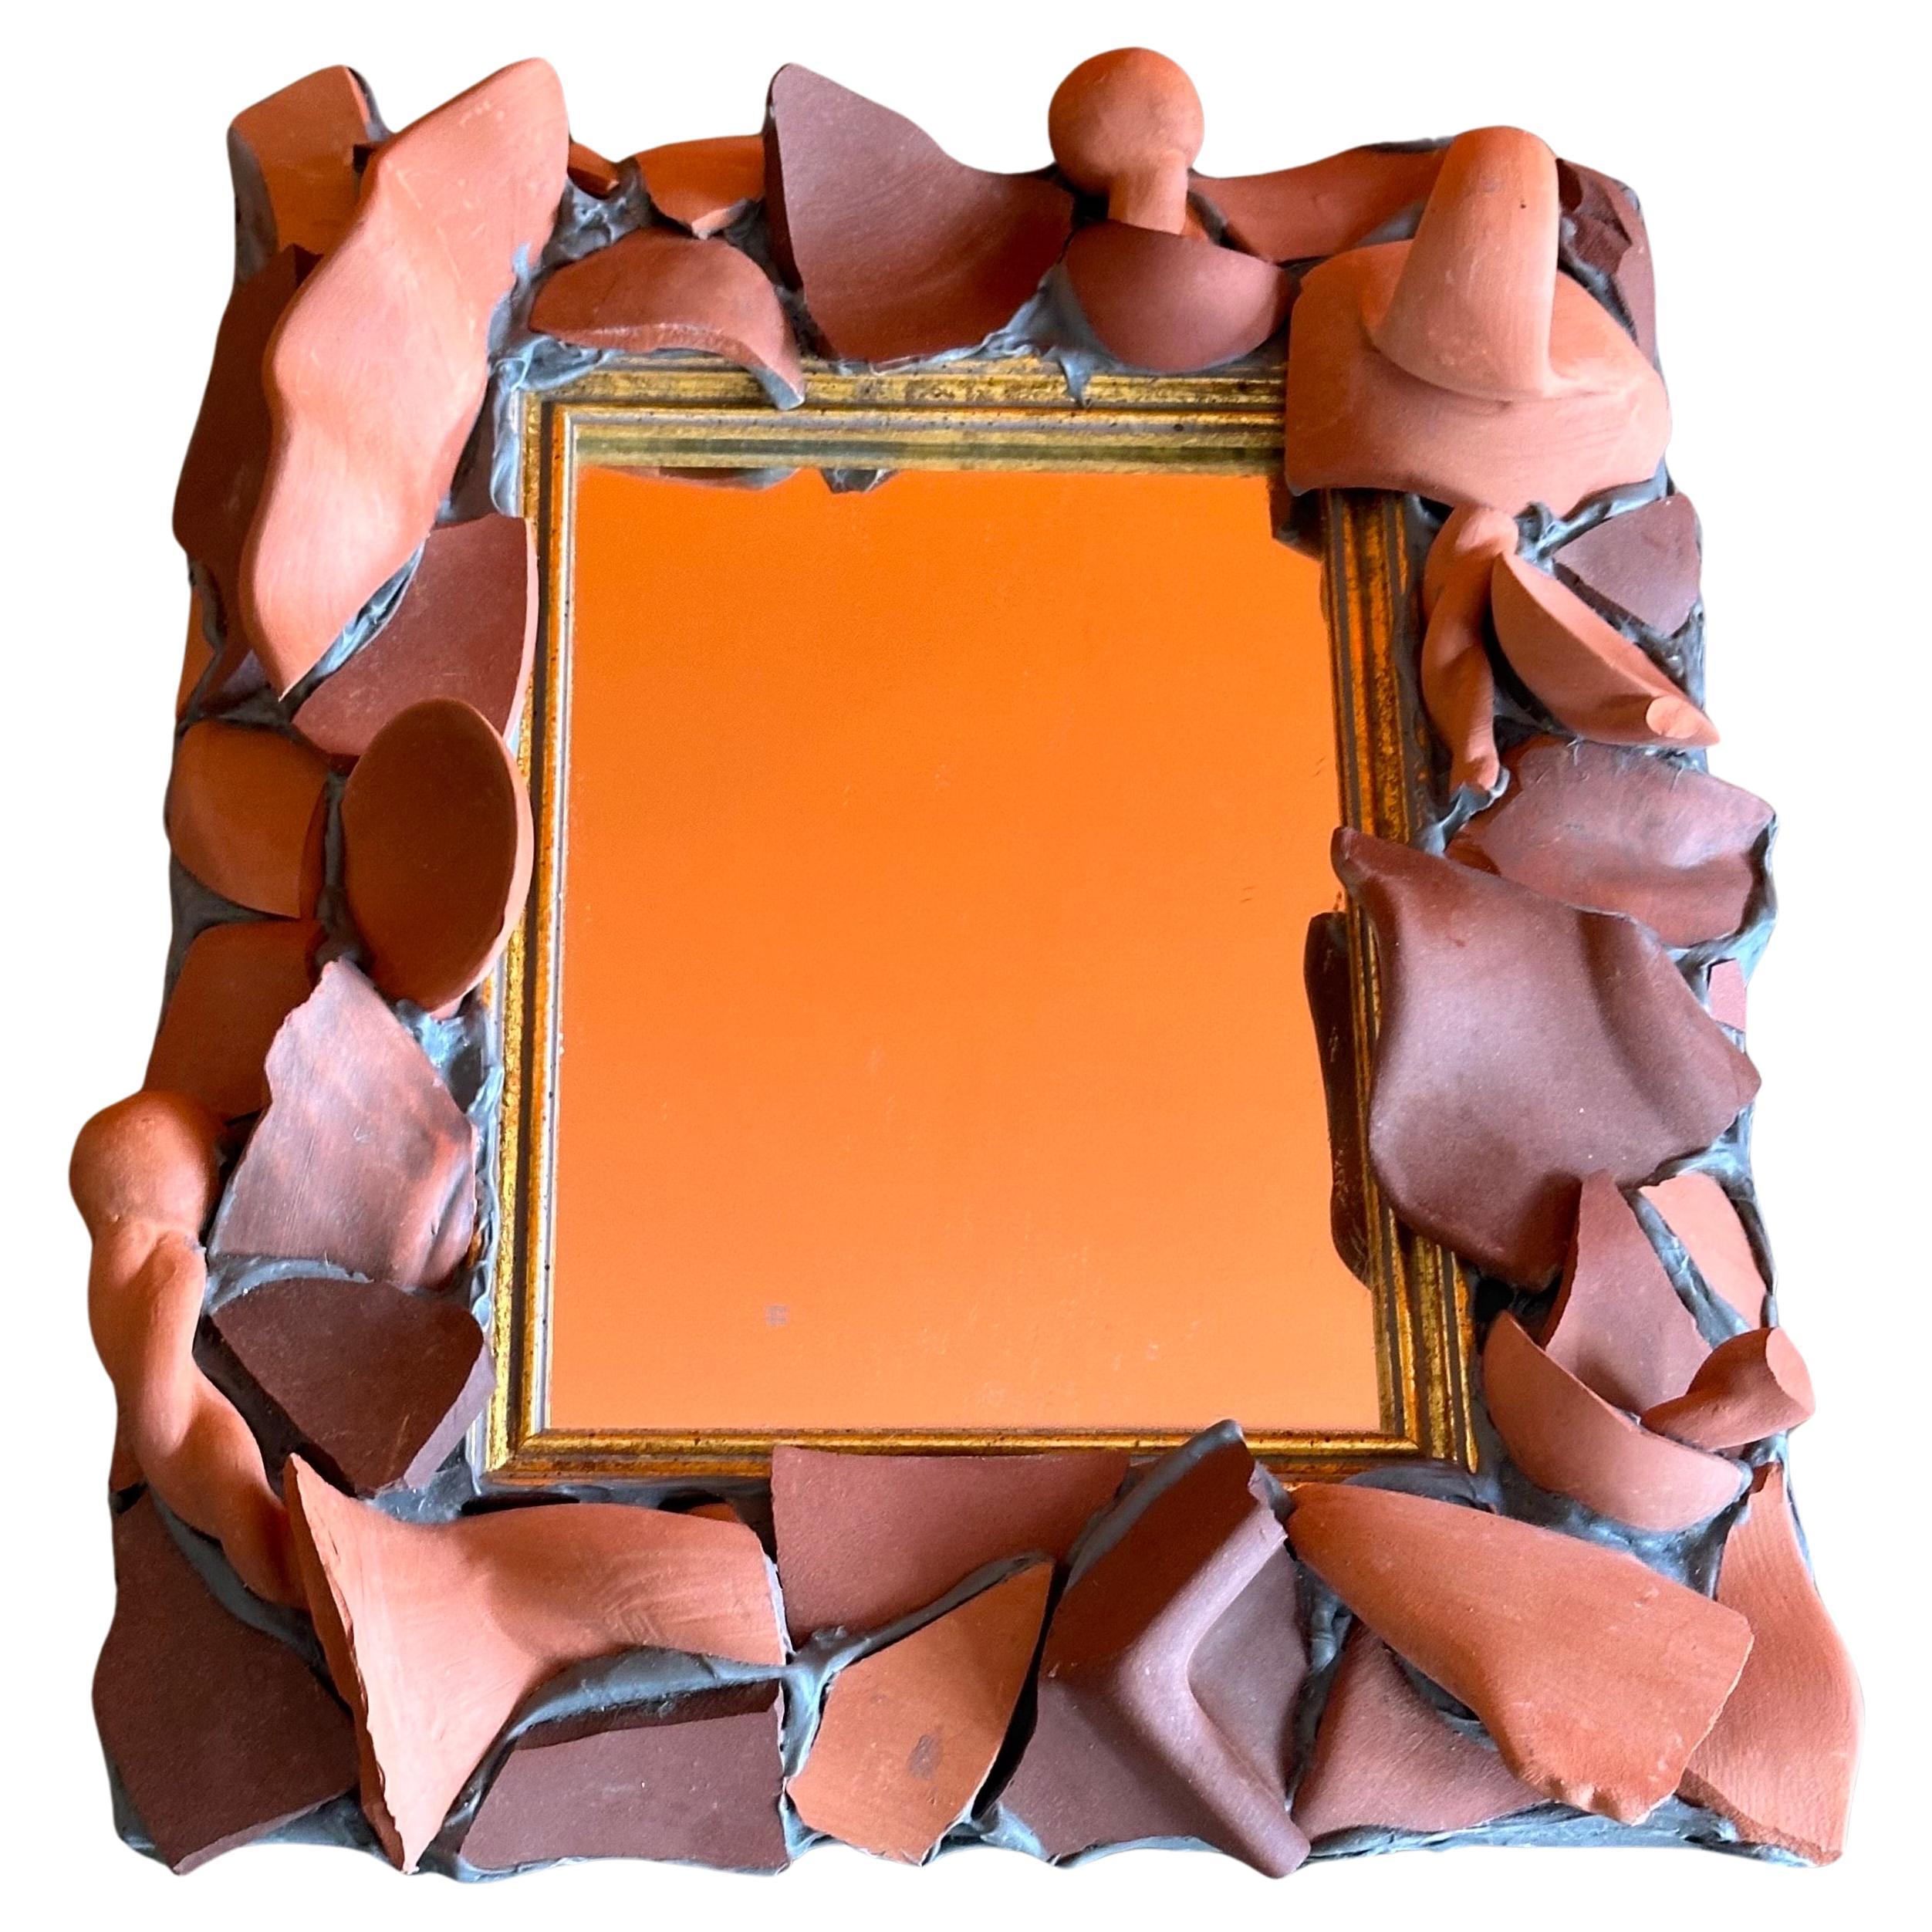 A super cool and incredibly hard to find terracotta pottery shards table mirror or picture frame by MacKenzie Childs, circa 1990s. The piece is in very good condition and measures 9.25